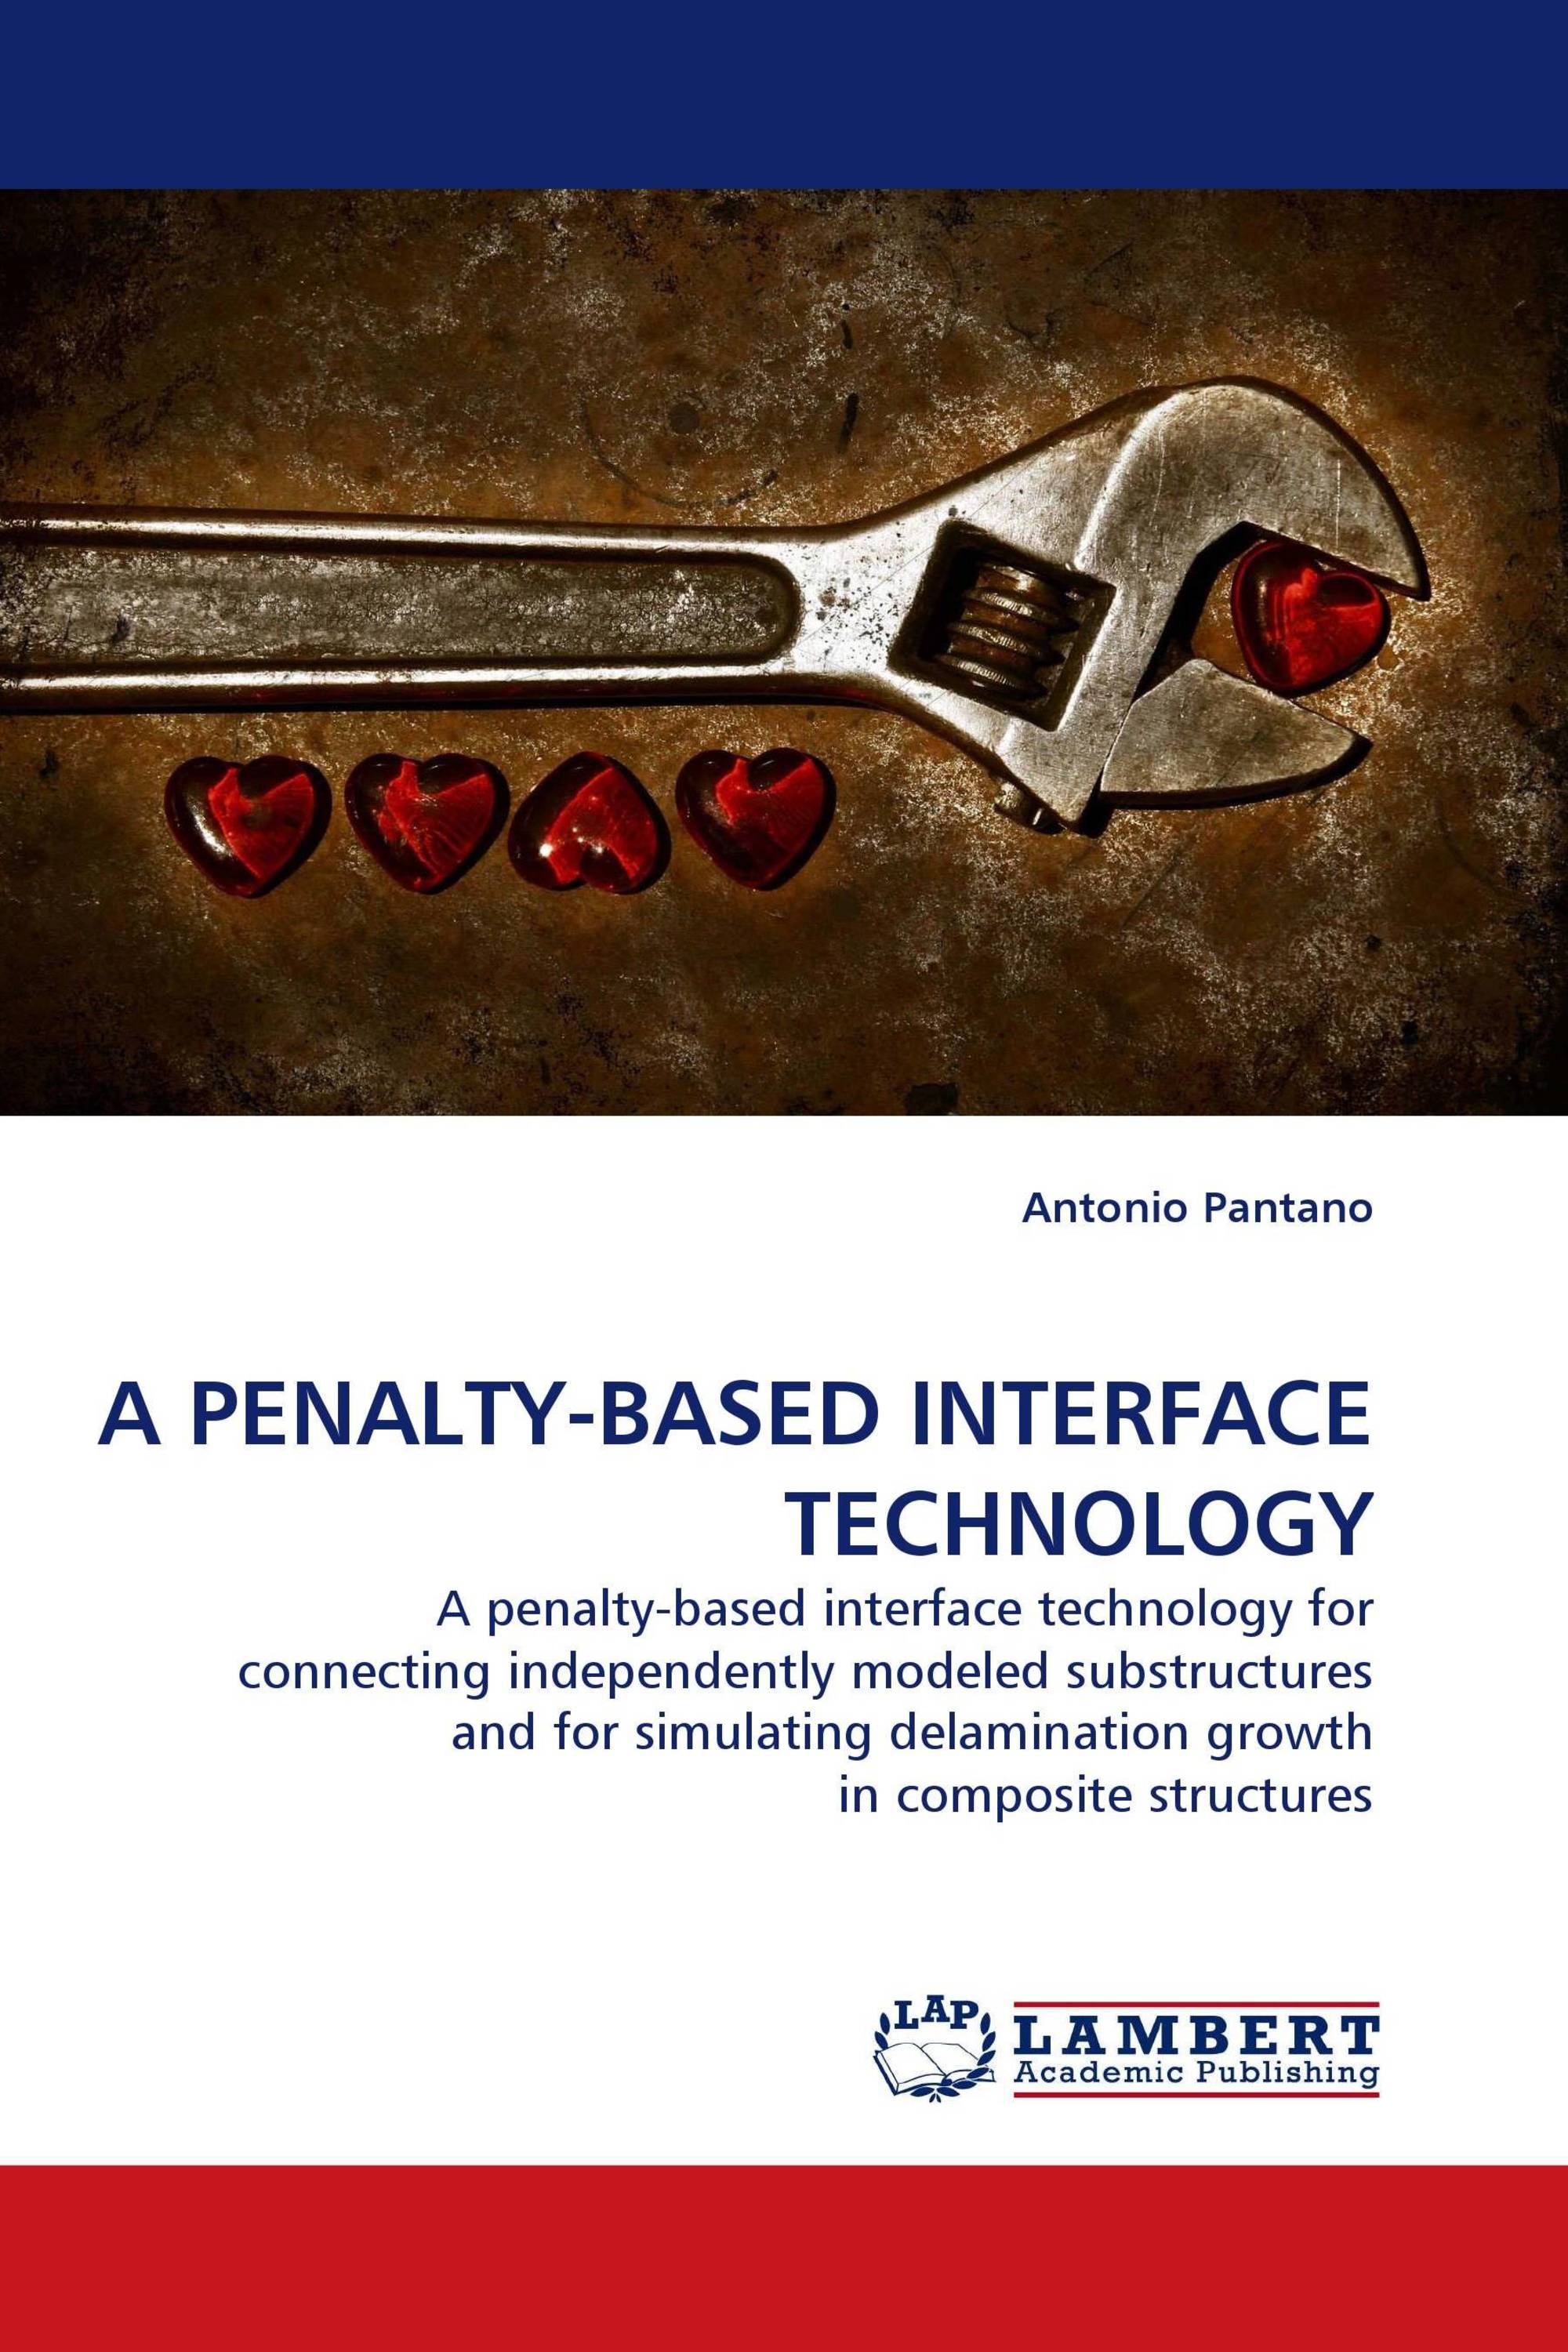 A PENALTY-BASED INTERFACE TECHNOLOGY